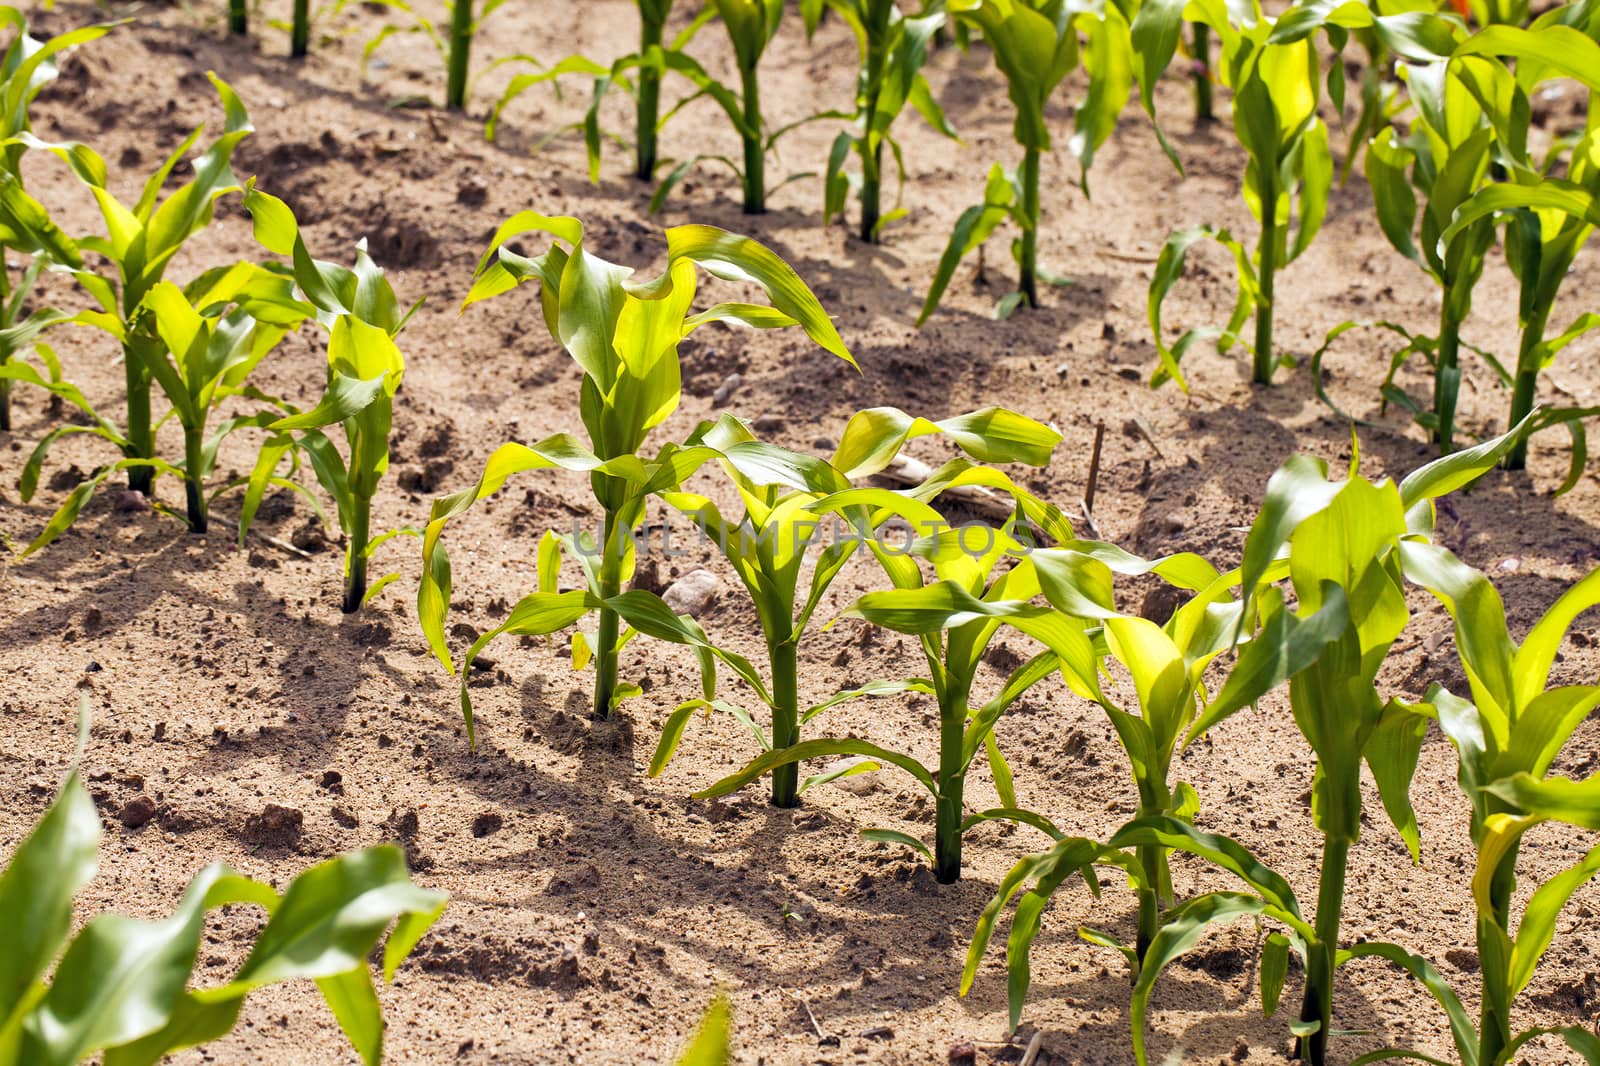   the young corn growing on an agricultural field